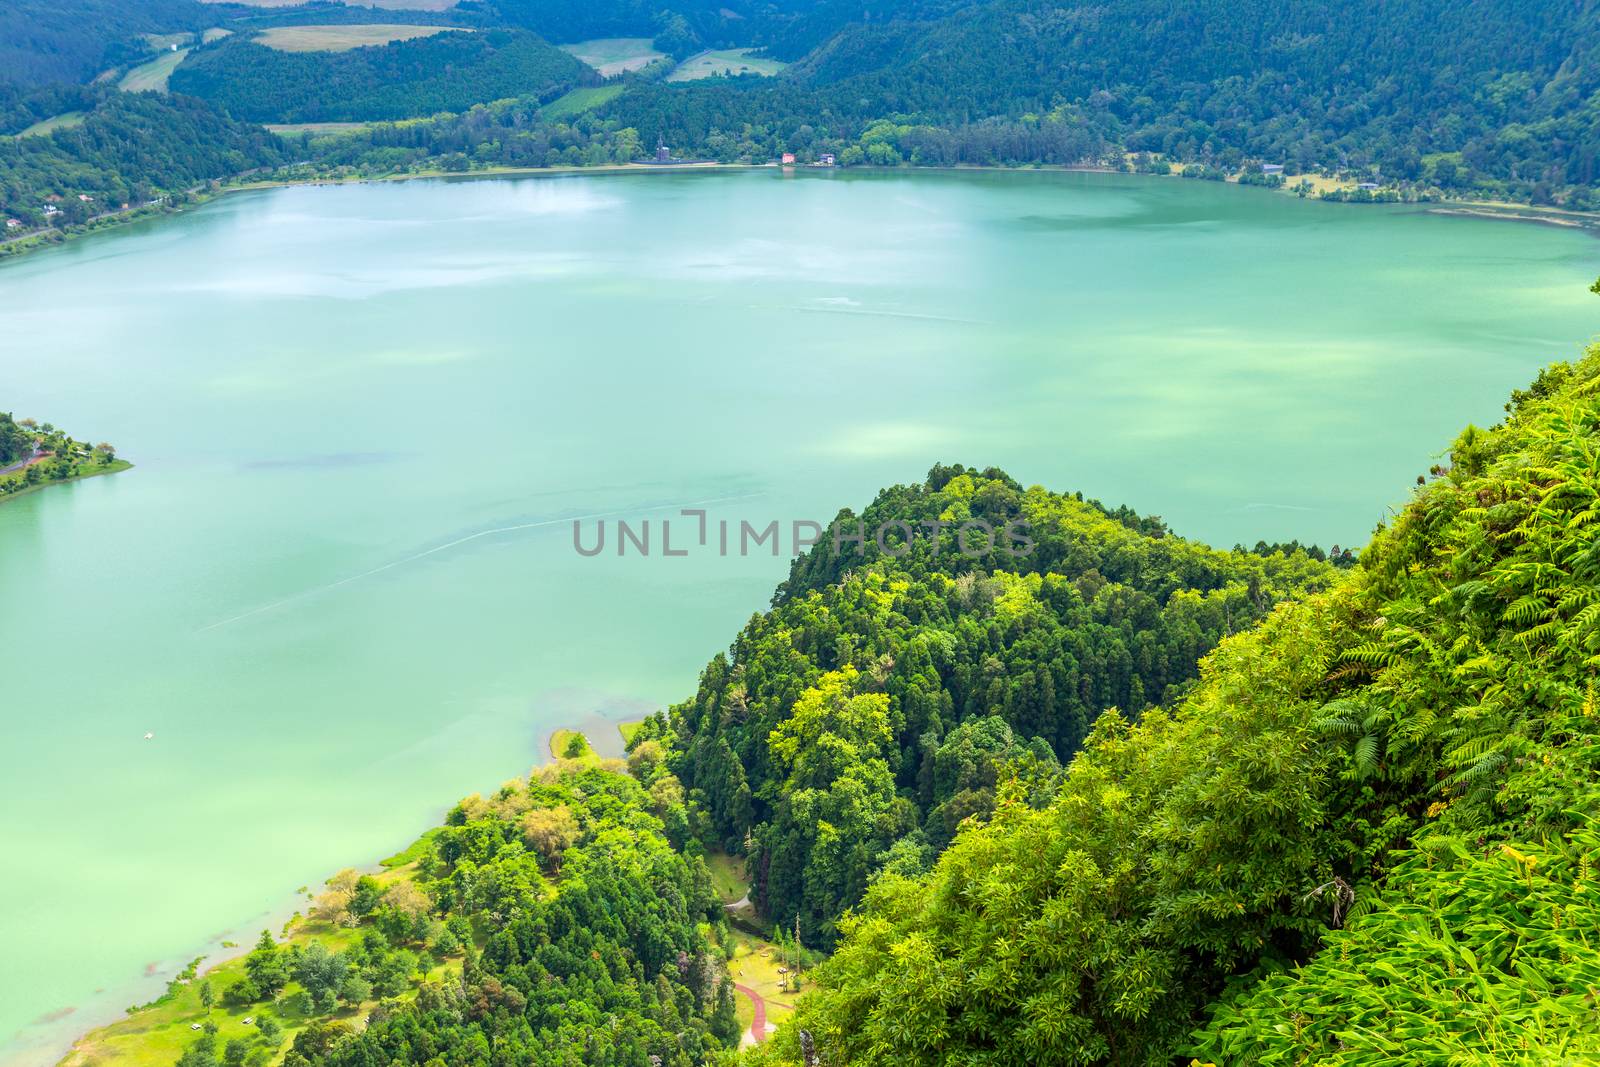 View of the Lake Furnas (Lagoa das Furnas) on Sao Miguel Island, Azores, Portugal from the Pico do Ferro scenic viewpoint.